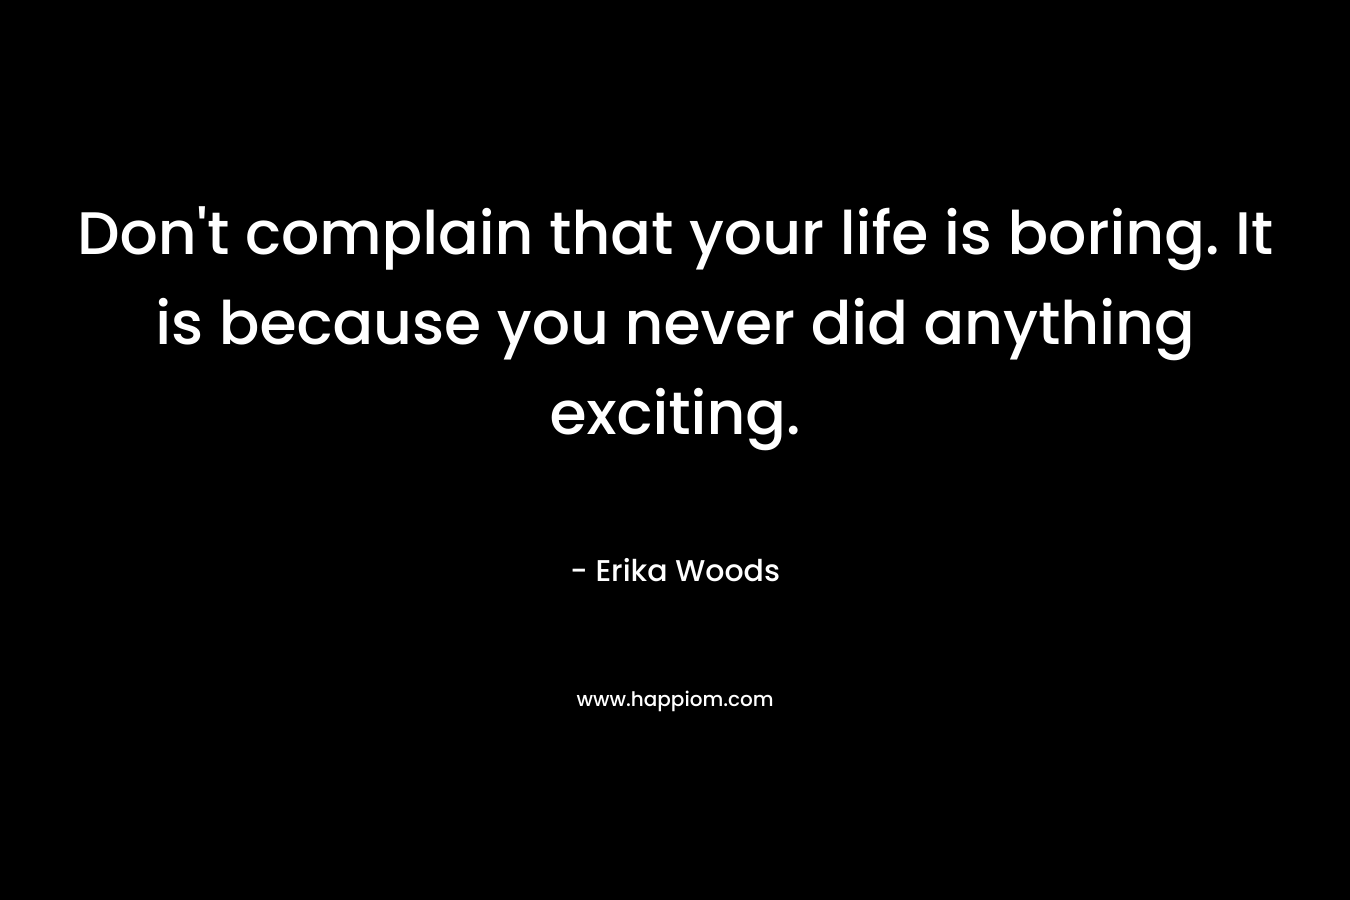 Don't complain that your life is boring. It is because you never did anything exciting.